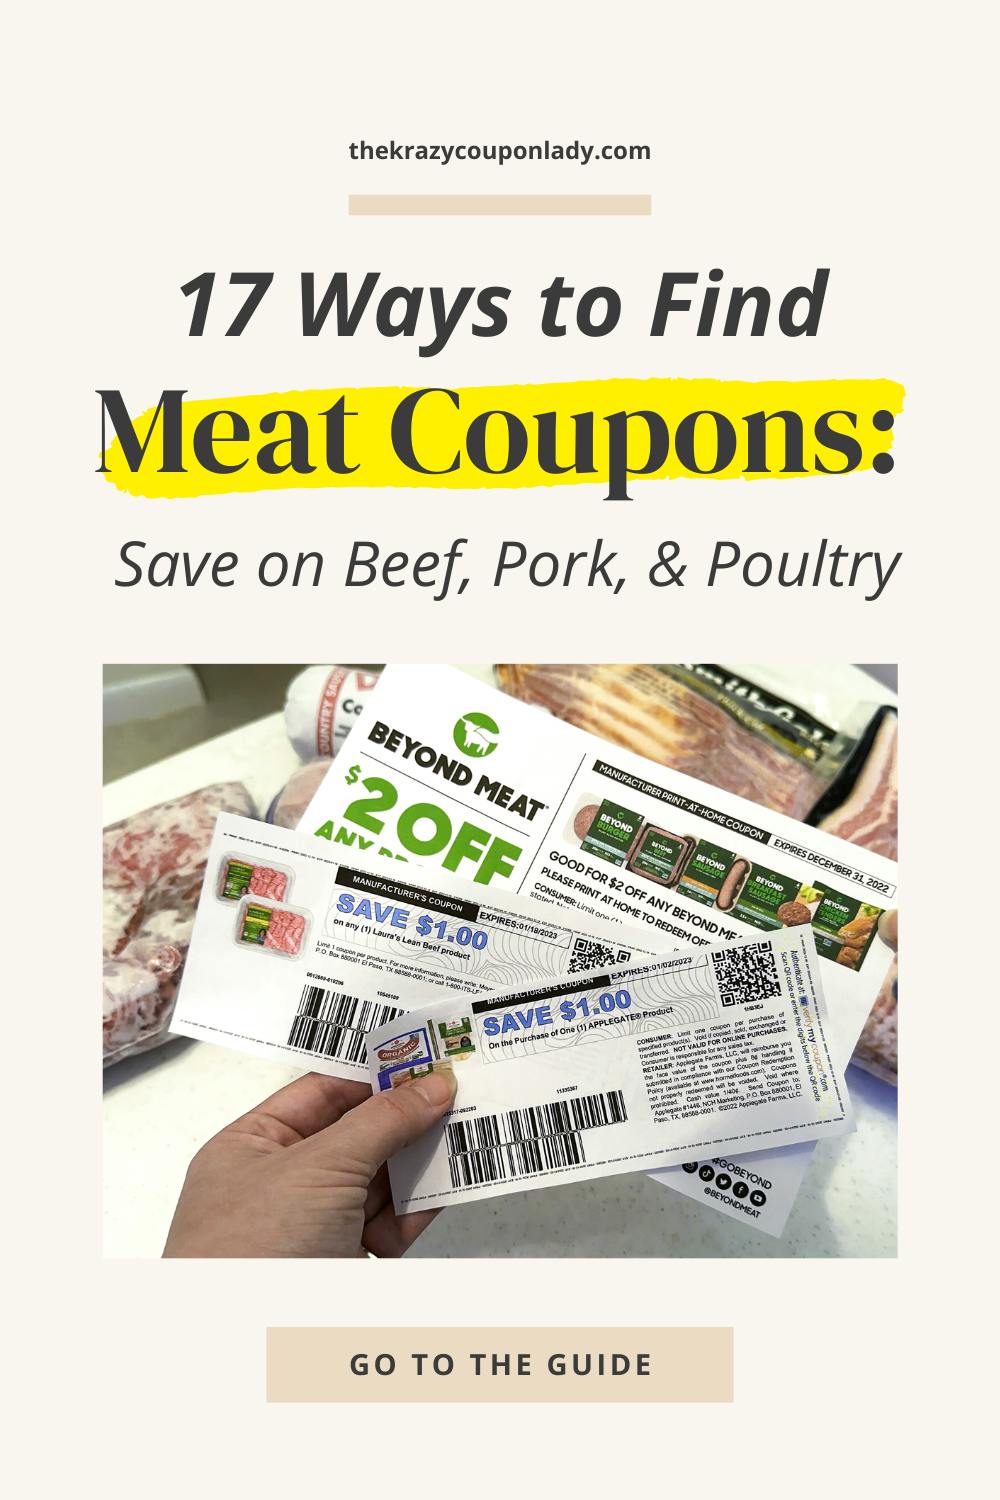 16 Ways to Find Coupons for Meat: Save on Beef, Pork & Poultry